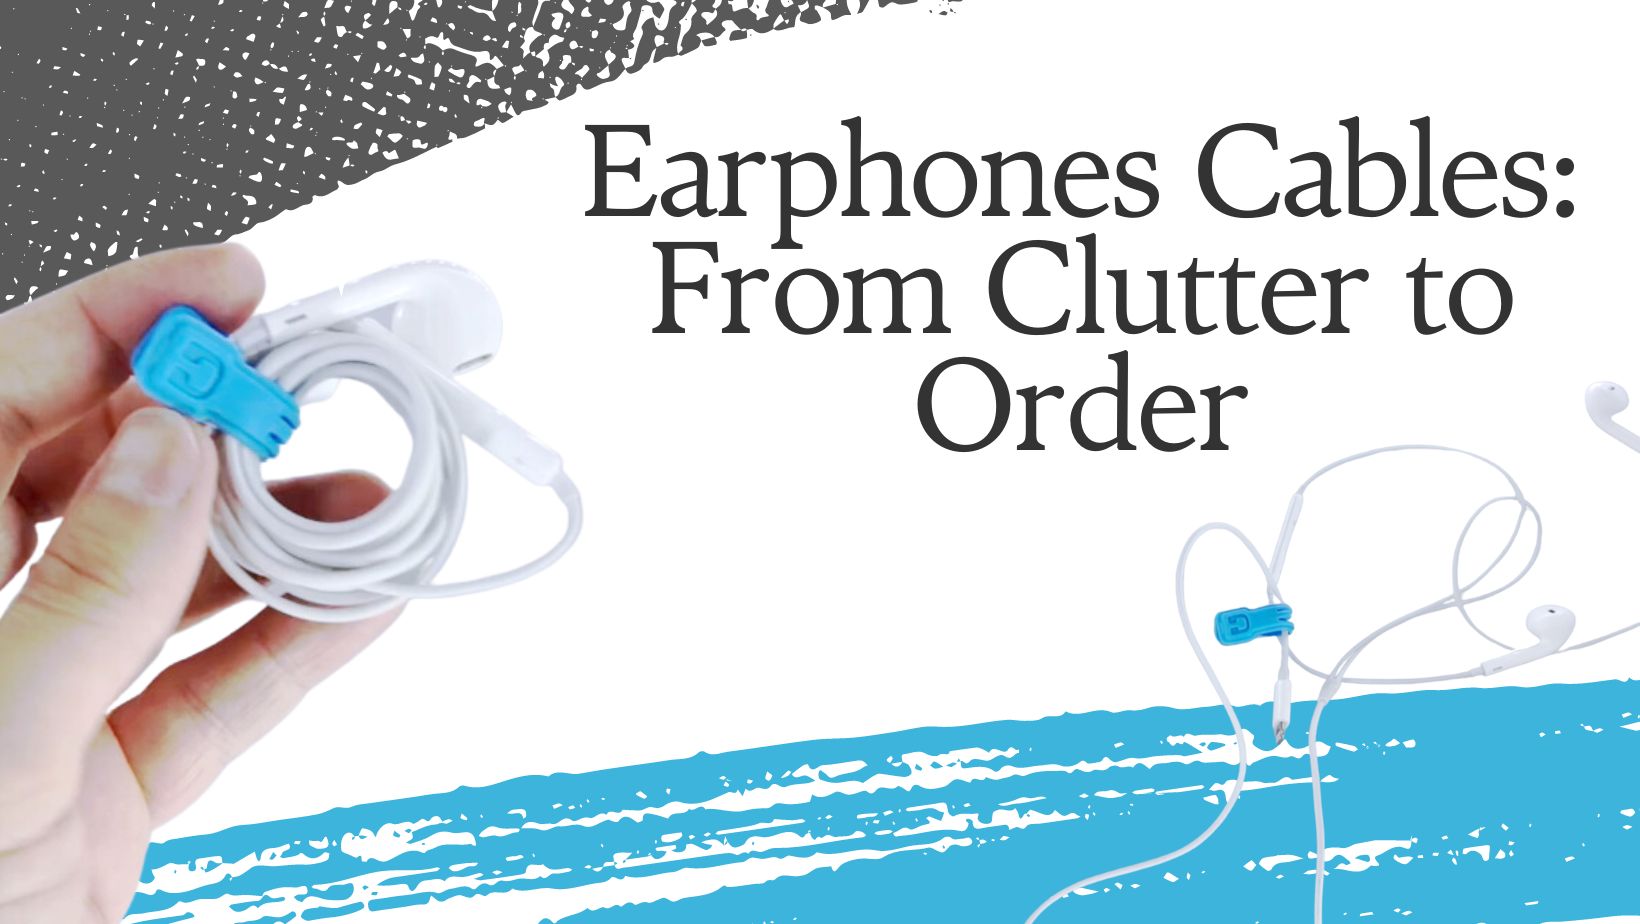 From Clutter to Order: The Ultimate Guide to Cable Management for Earphones